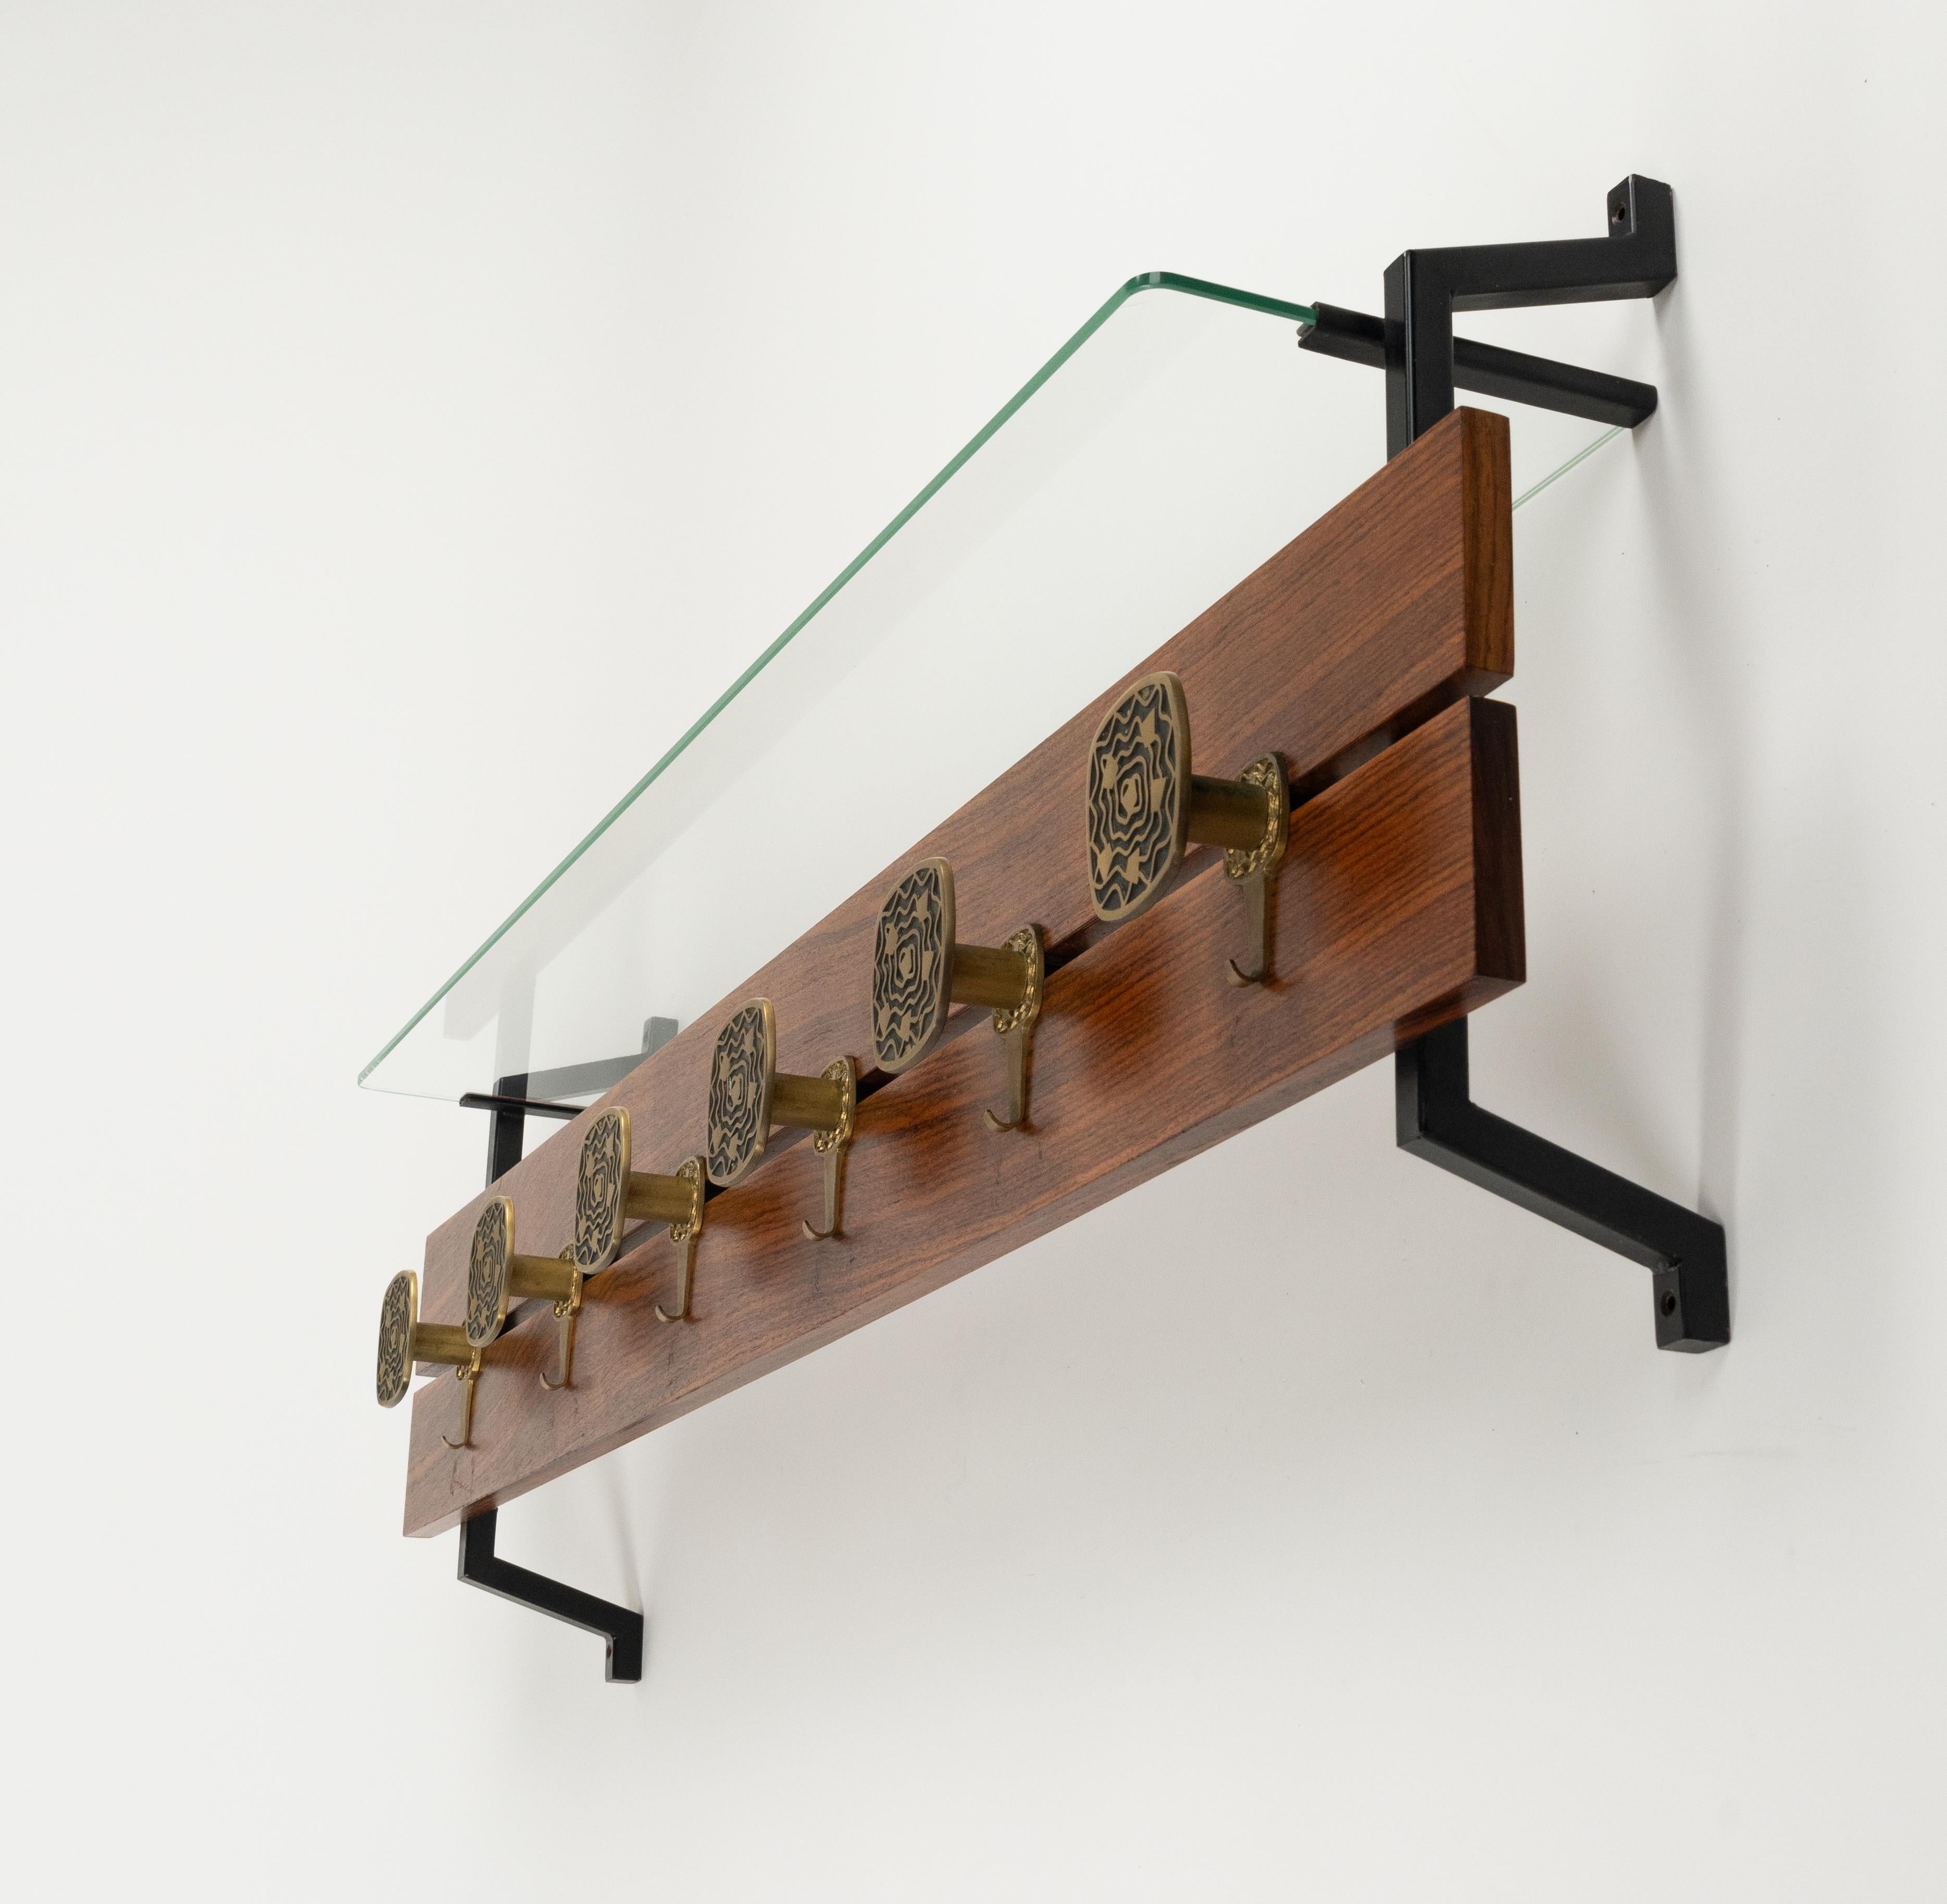 Midcentury Wood, Glass and Brass Coat Rack Herta Baller Style, Italy 1970s For Sale 6